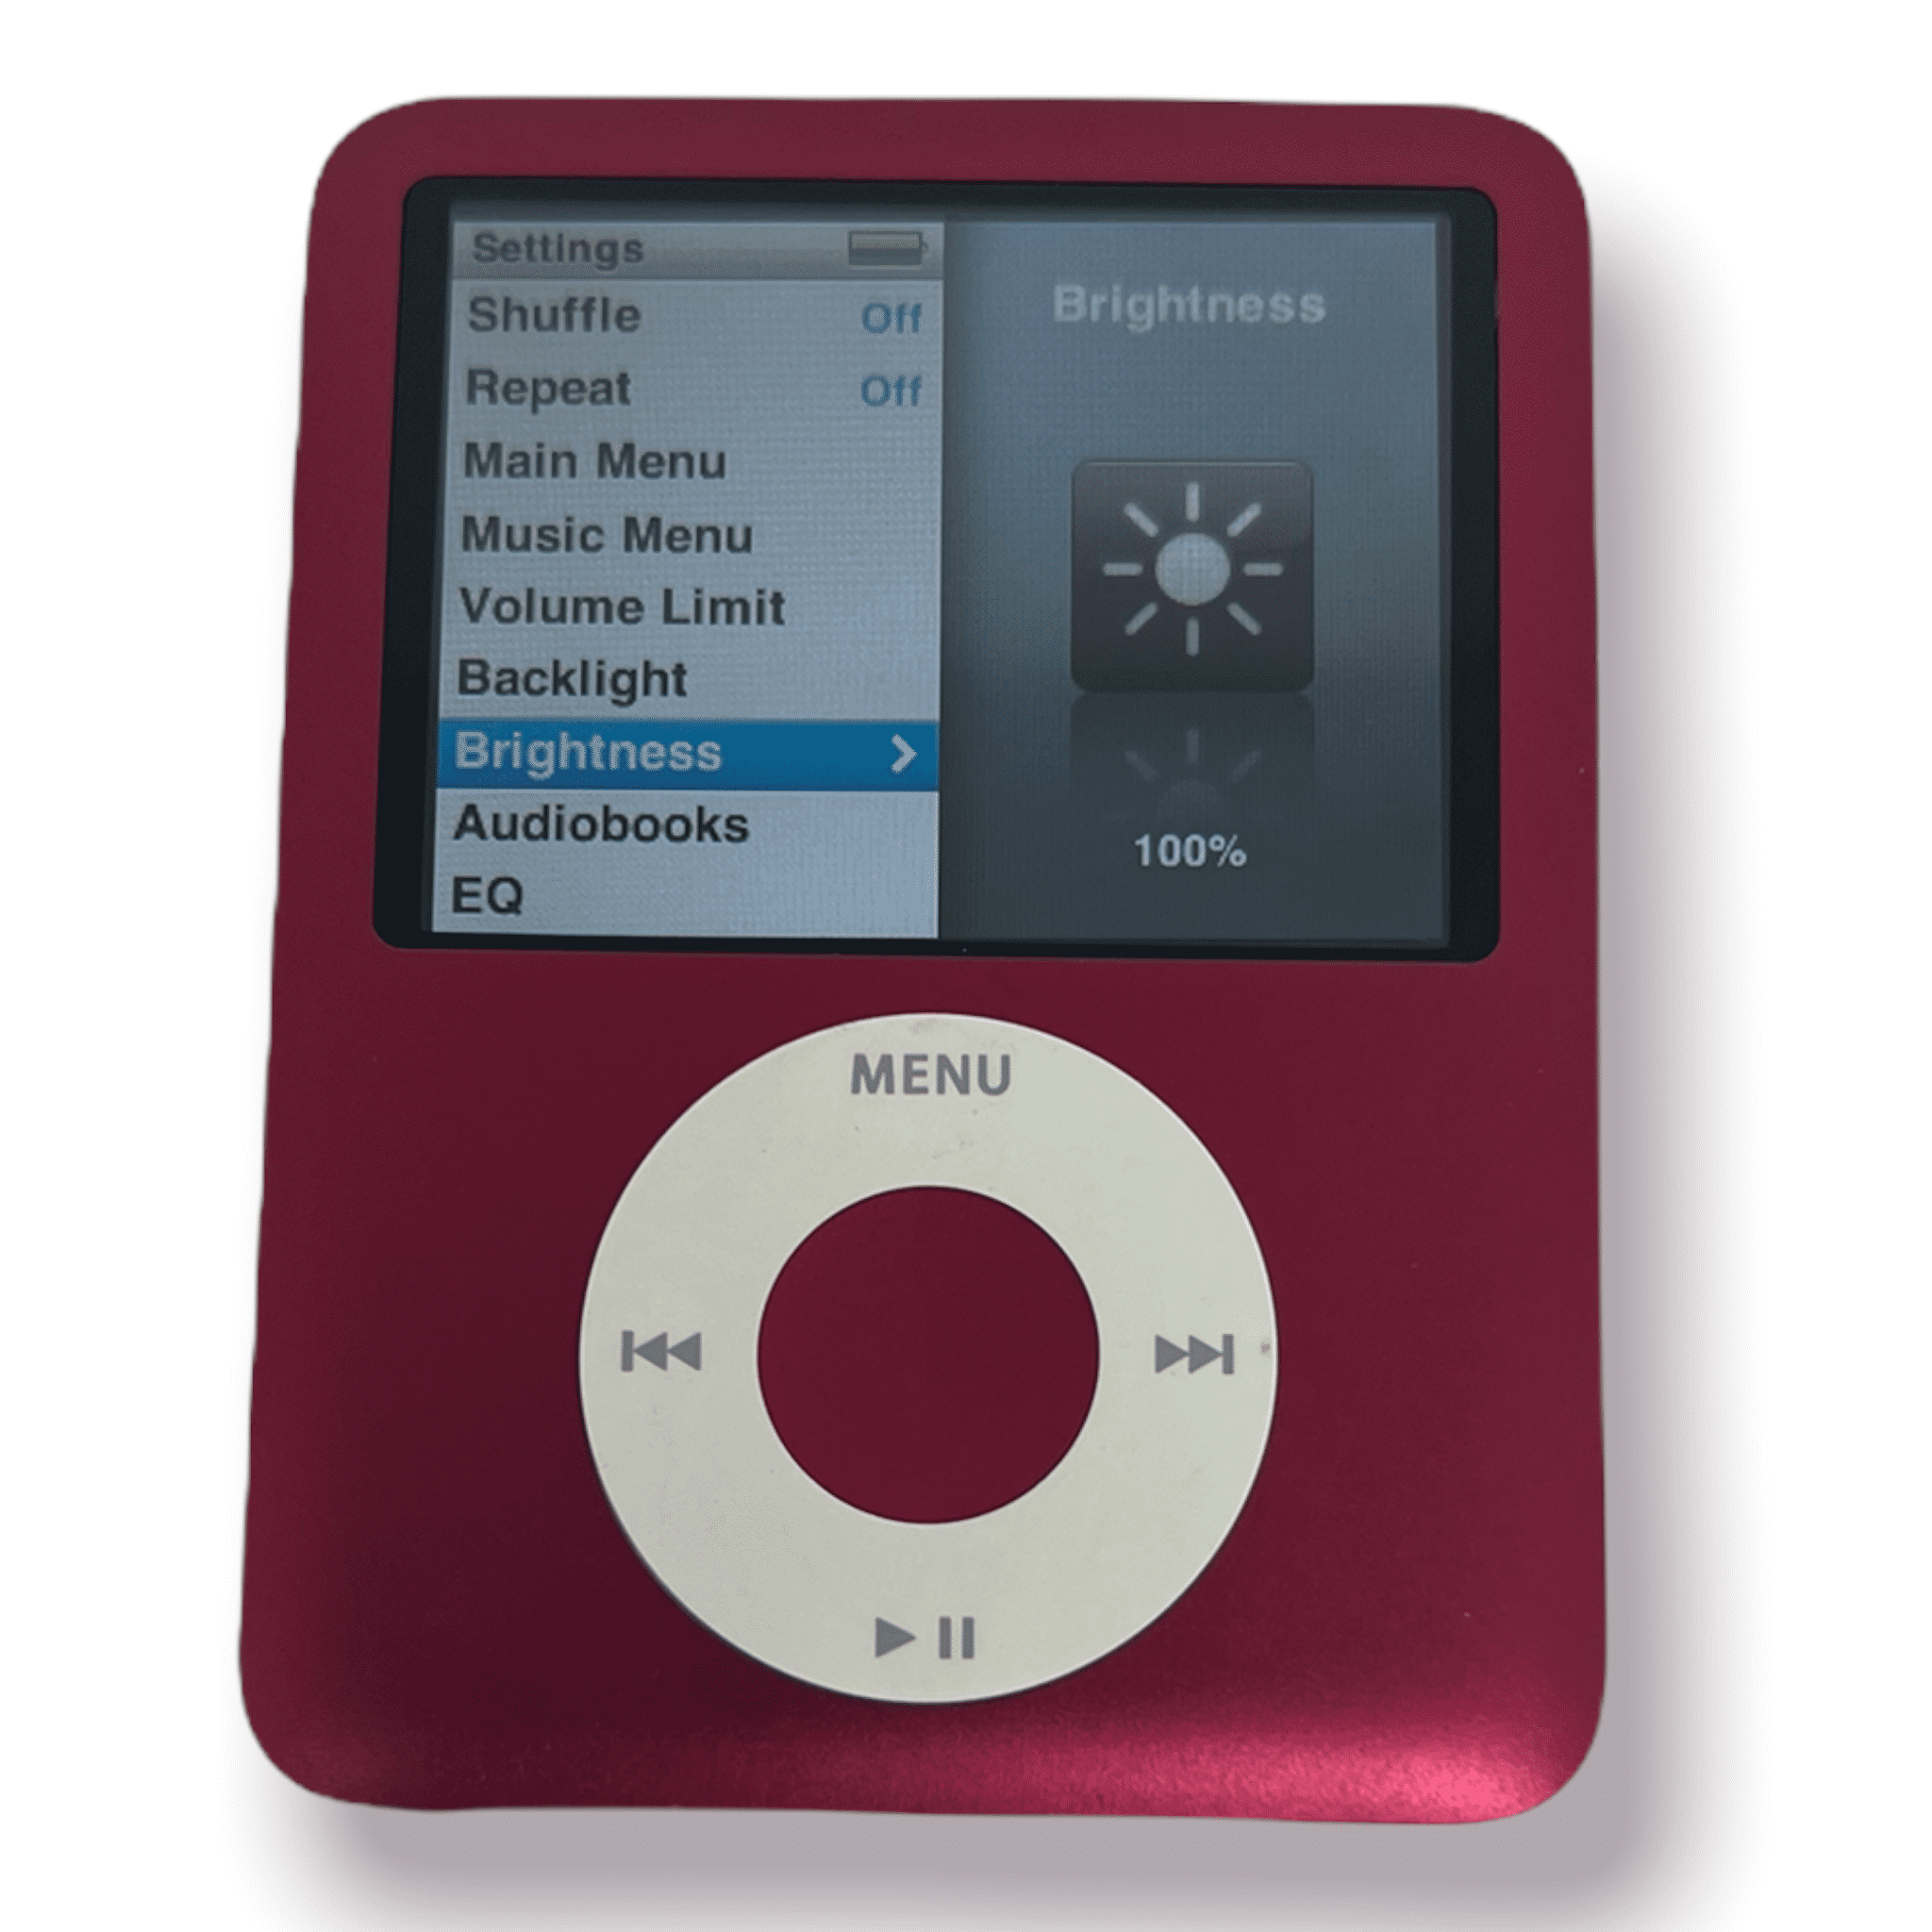 iPod Nano 3rd Gen 8GB Red, MP3 Player, Excellent Condition, includes FREE case by Griffin! - Walmart.com